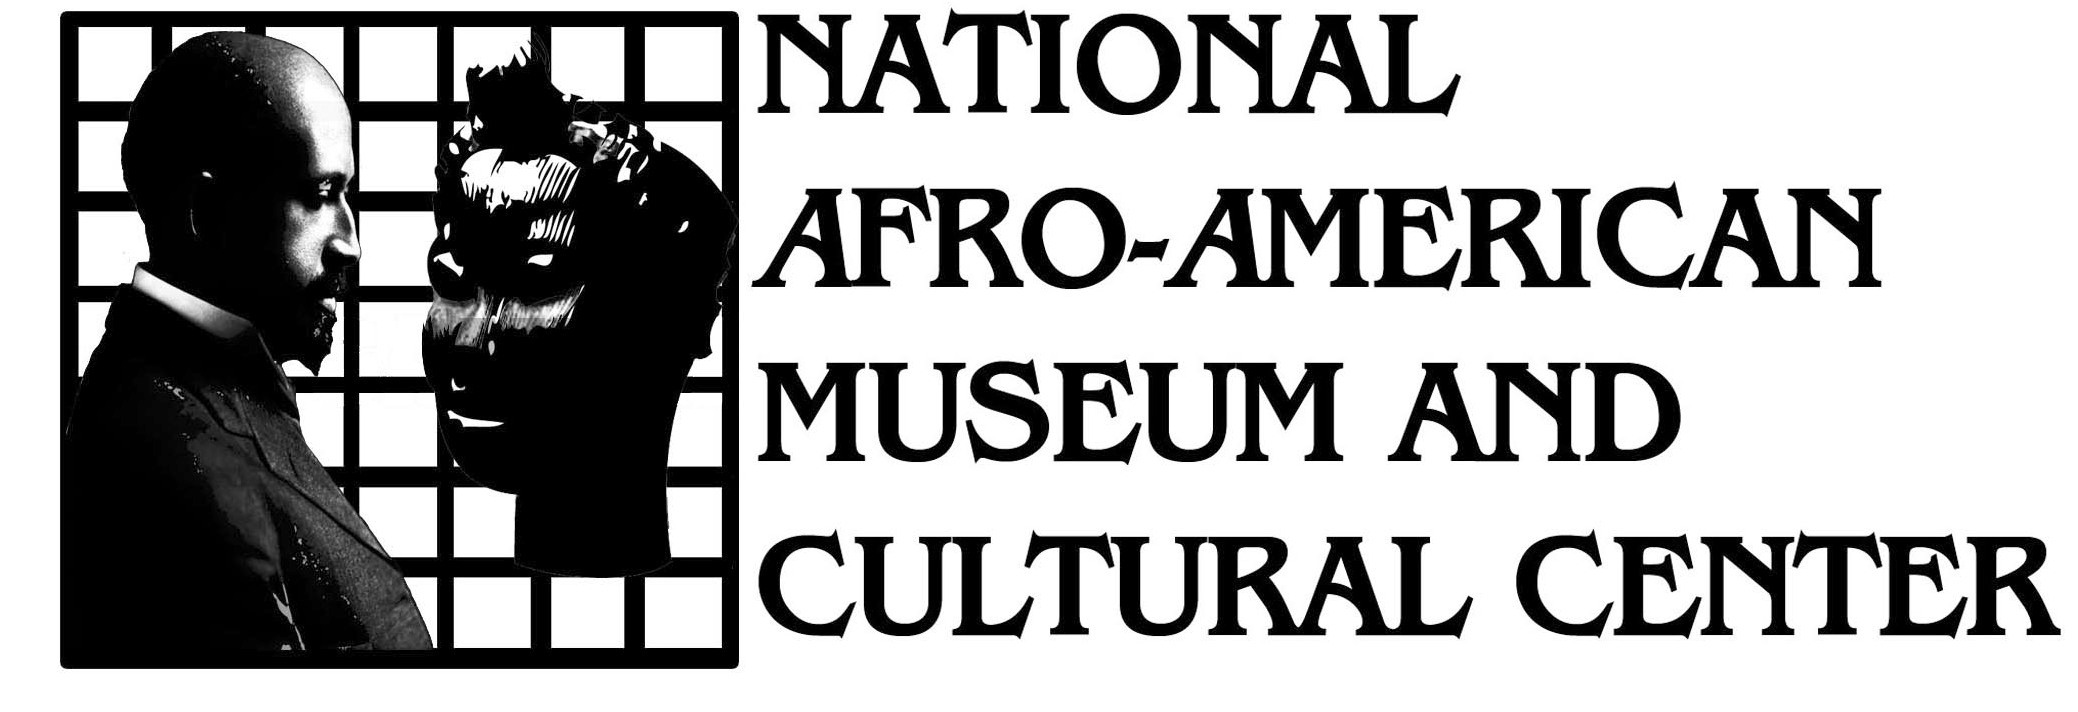 Tell Us Why the National Afro-American Museum and Cultural Center & Black History Matters to You